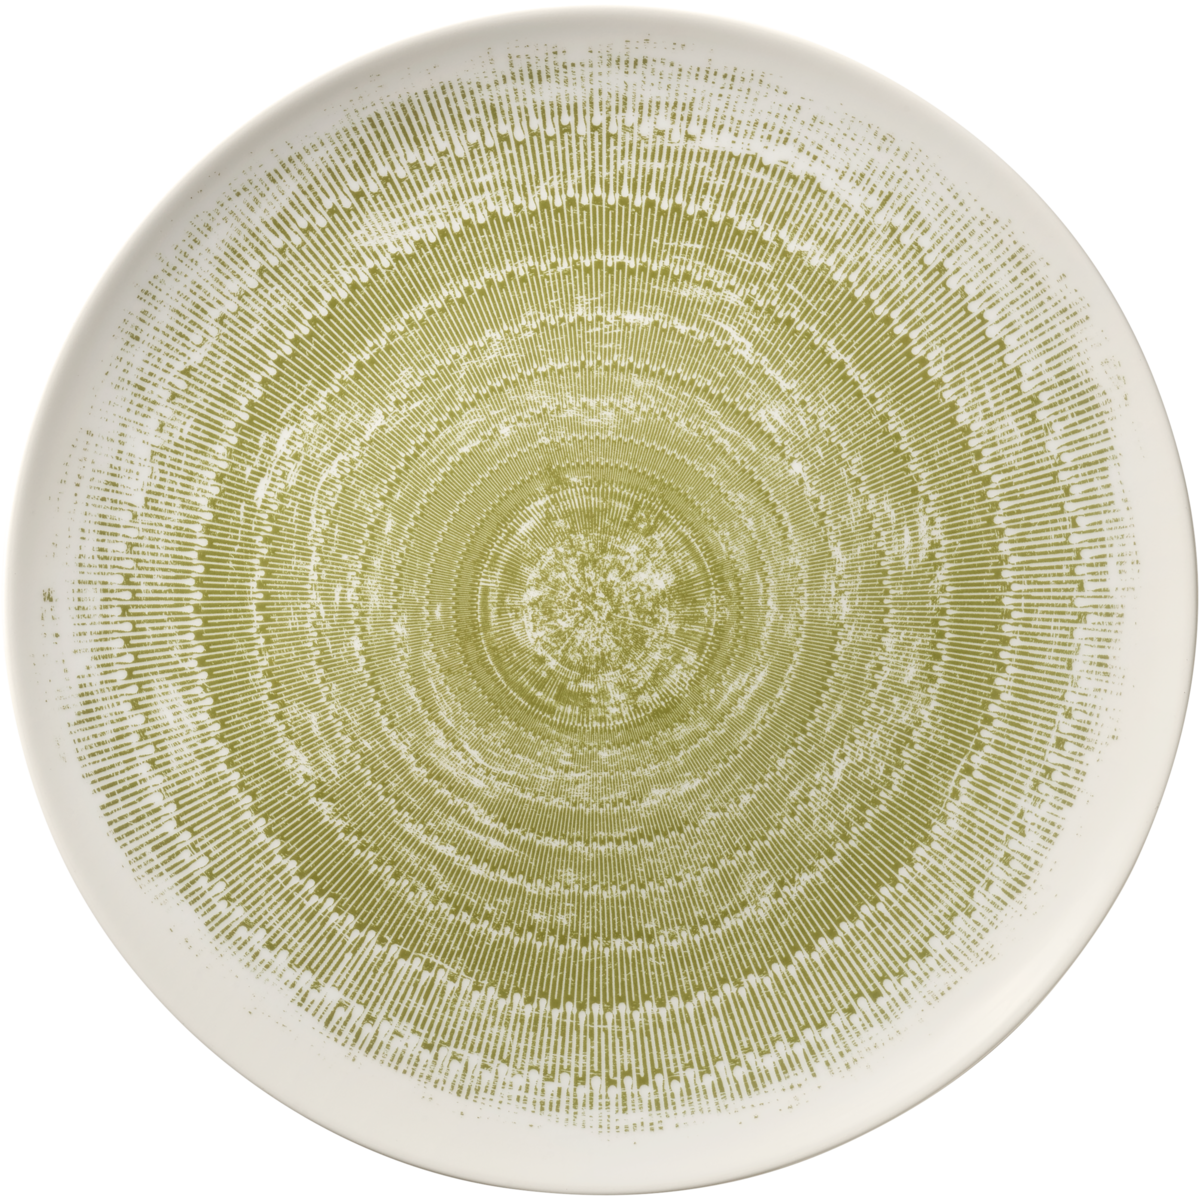 Plate flat round coupe 31cm